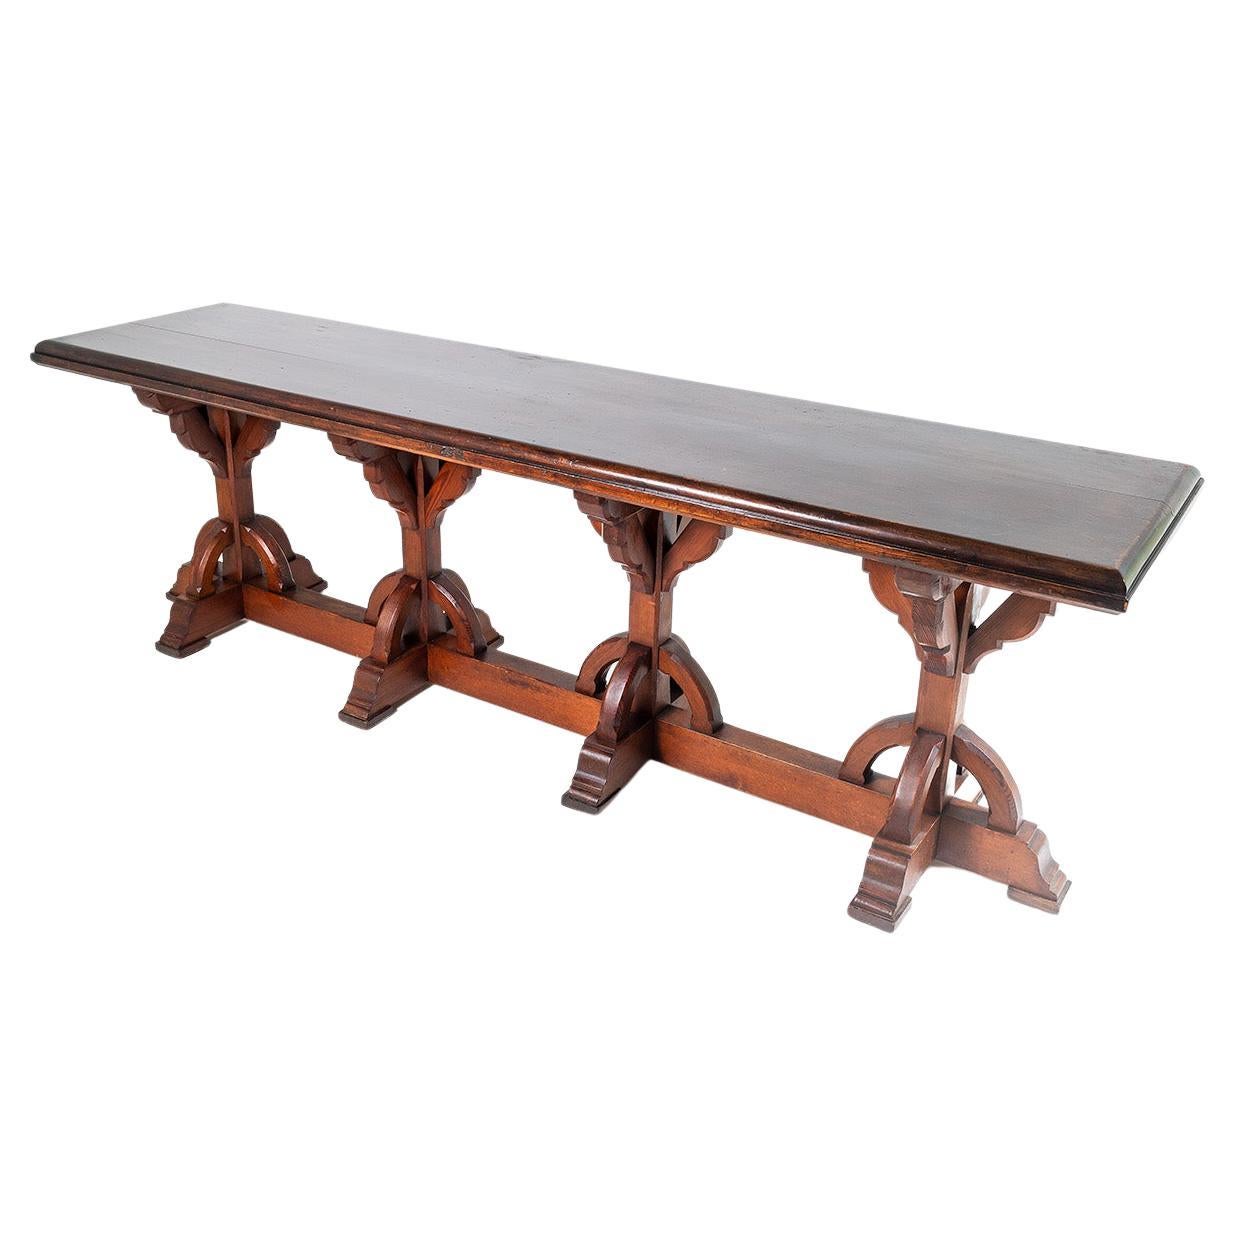 A superb 19th century Gothic Revival centre table in the manner of A.W.N Pugin (unattributed). Would make a wonderful serving table or large console table. Narrow form make this piece versatile for use in a Hallway or corridor.

A large scale